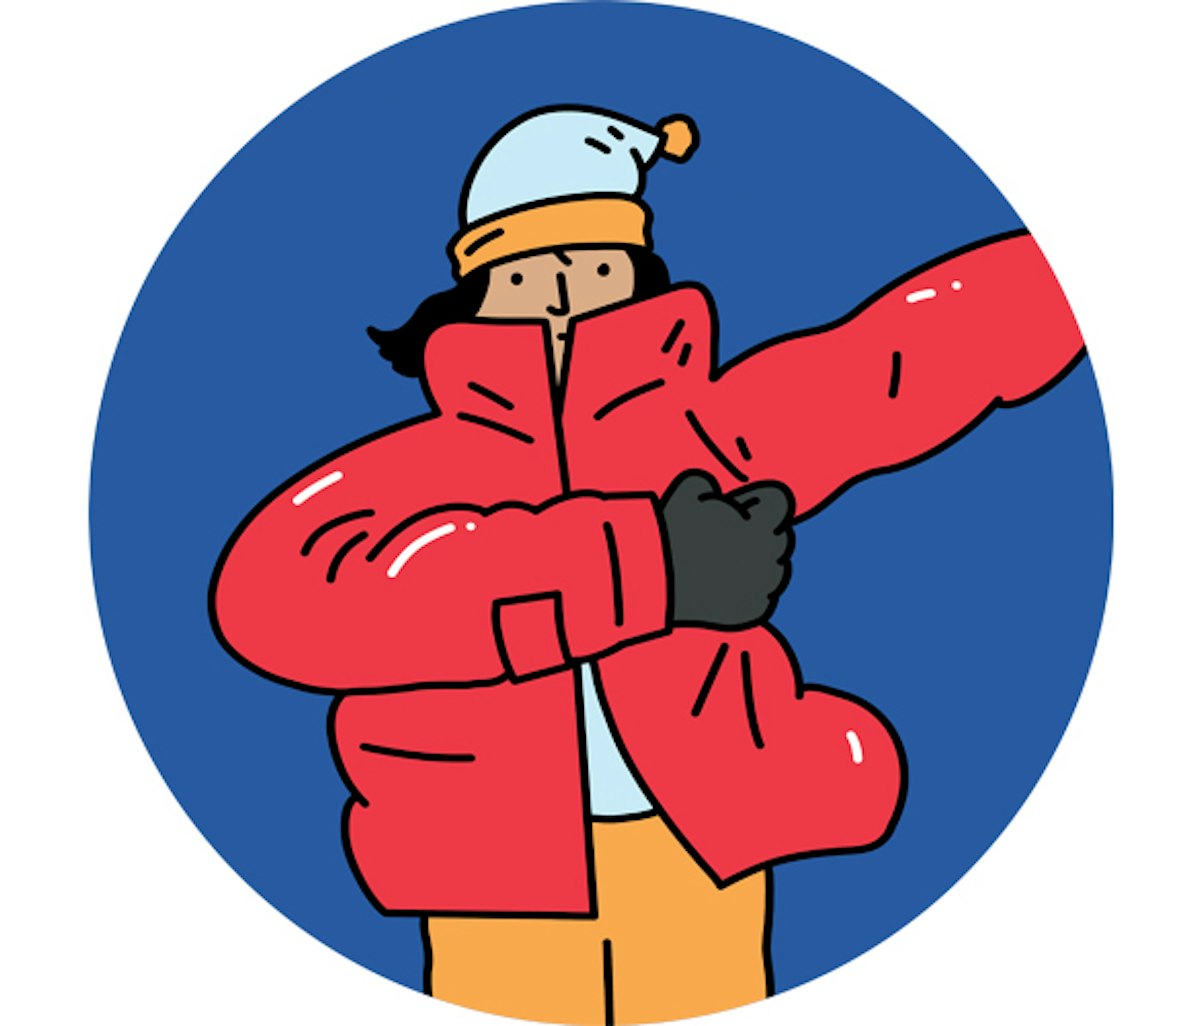 A cartoon illustration of a person wearing a red jacket and hat.